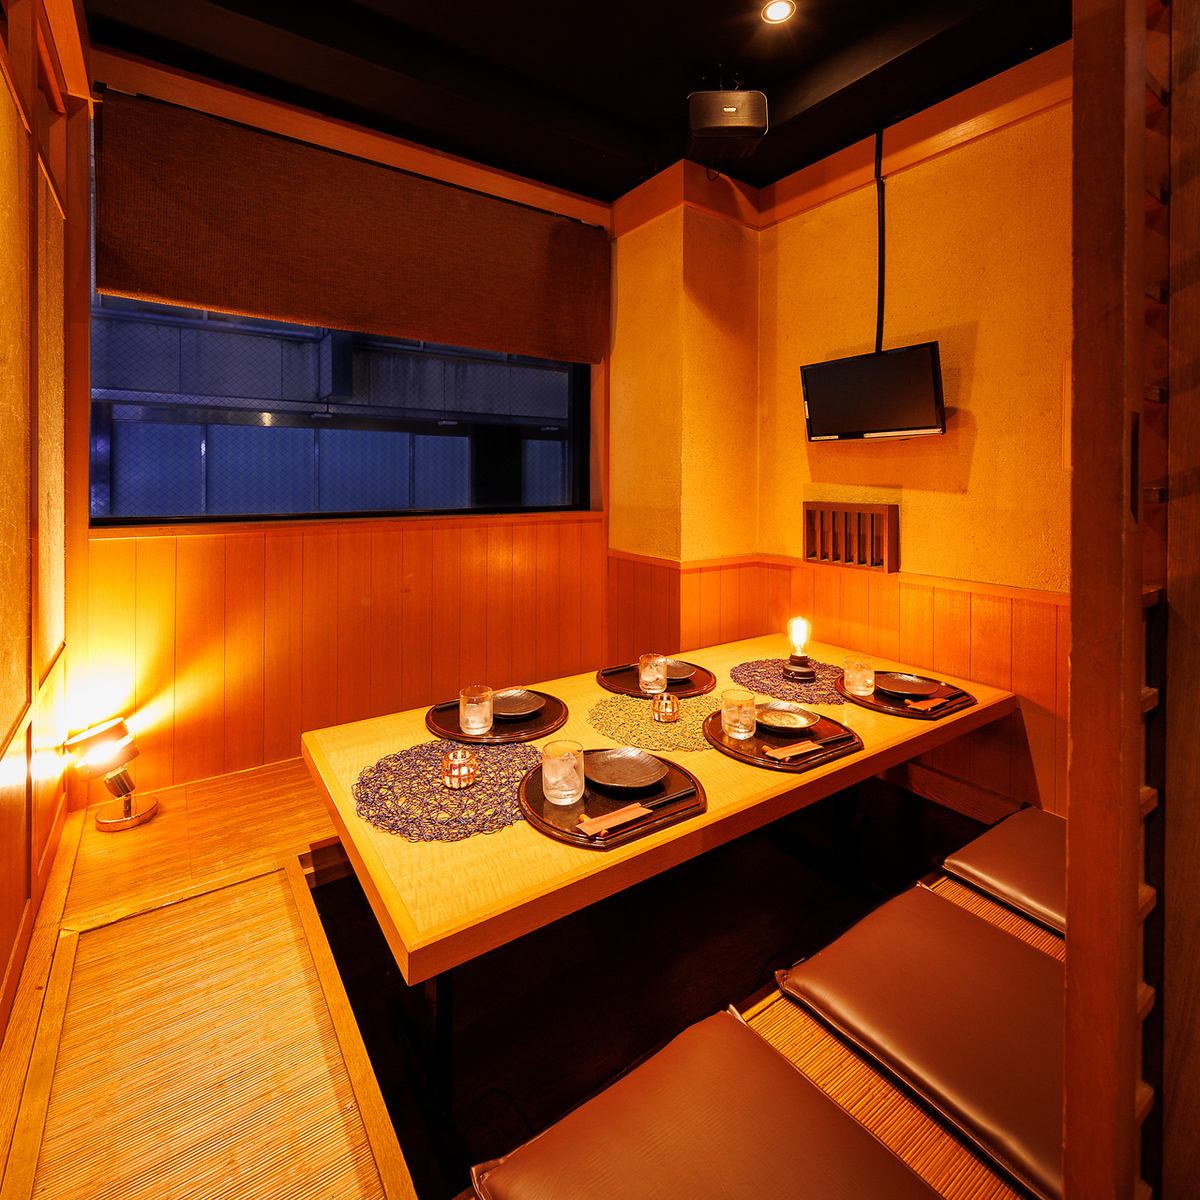 ★ A restaurant where you can have a leisurely party for more than 3 hours ★ A calm Japanese space